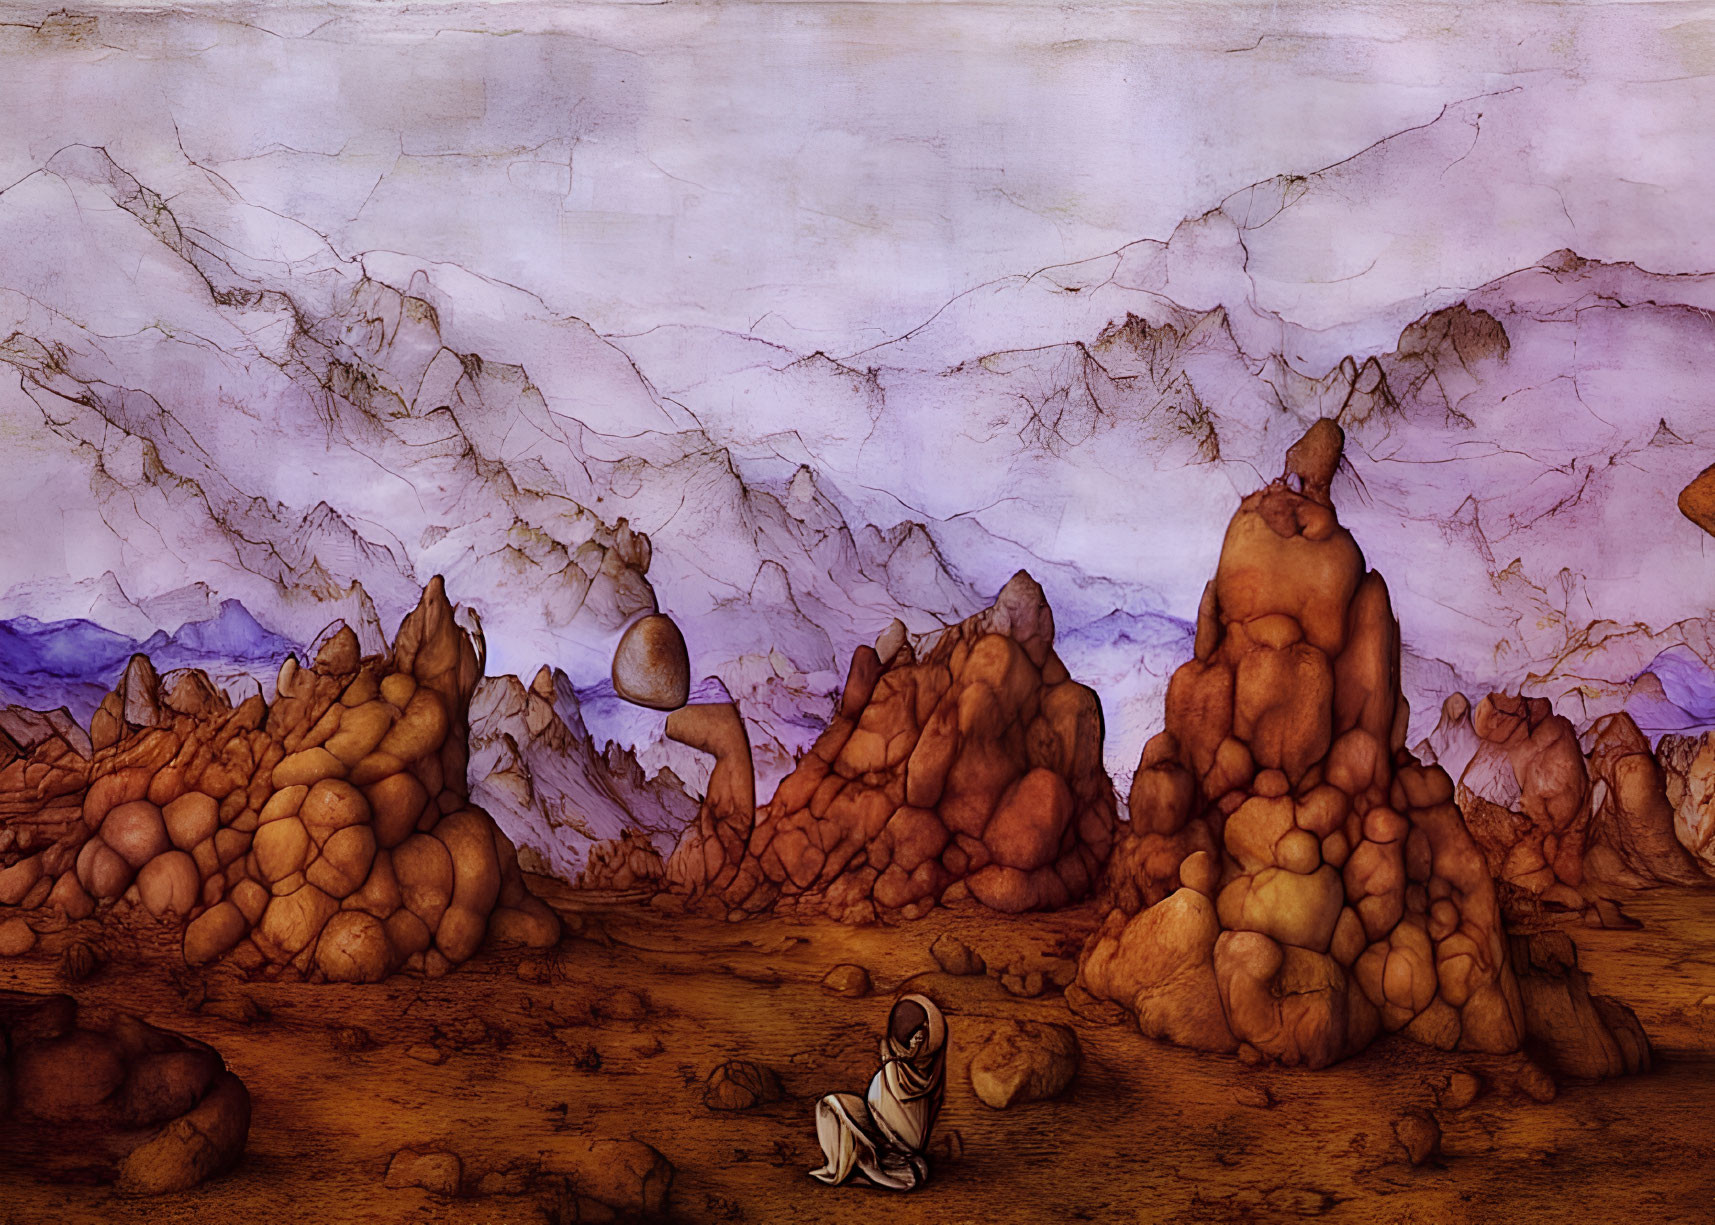 Surreal landscape with rocky formations and seated figure under sky with orbs and mountains